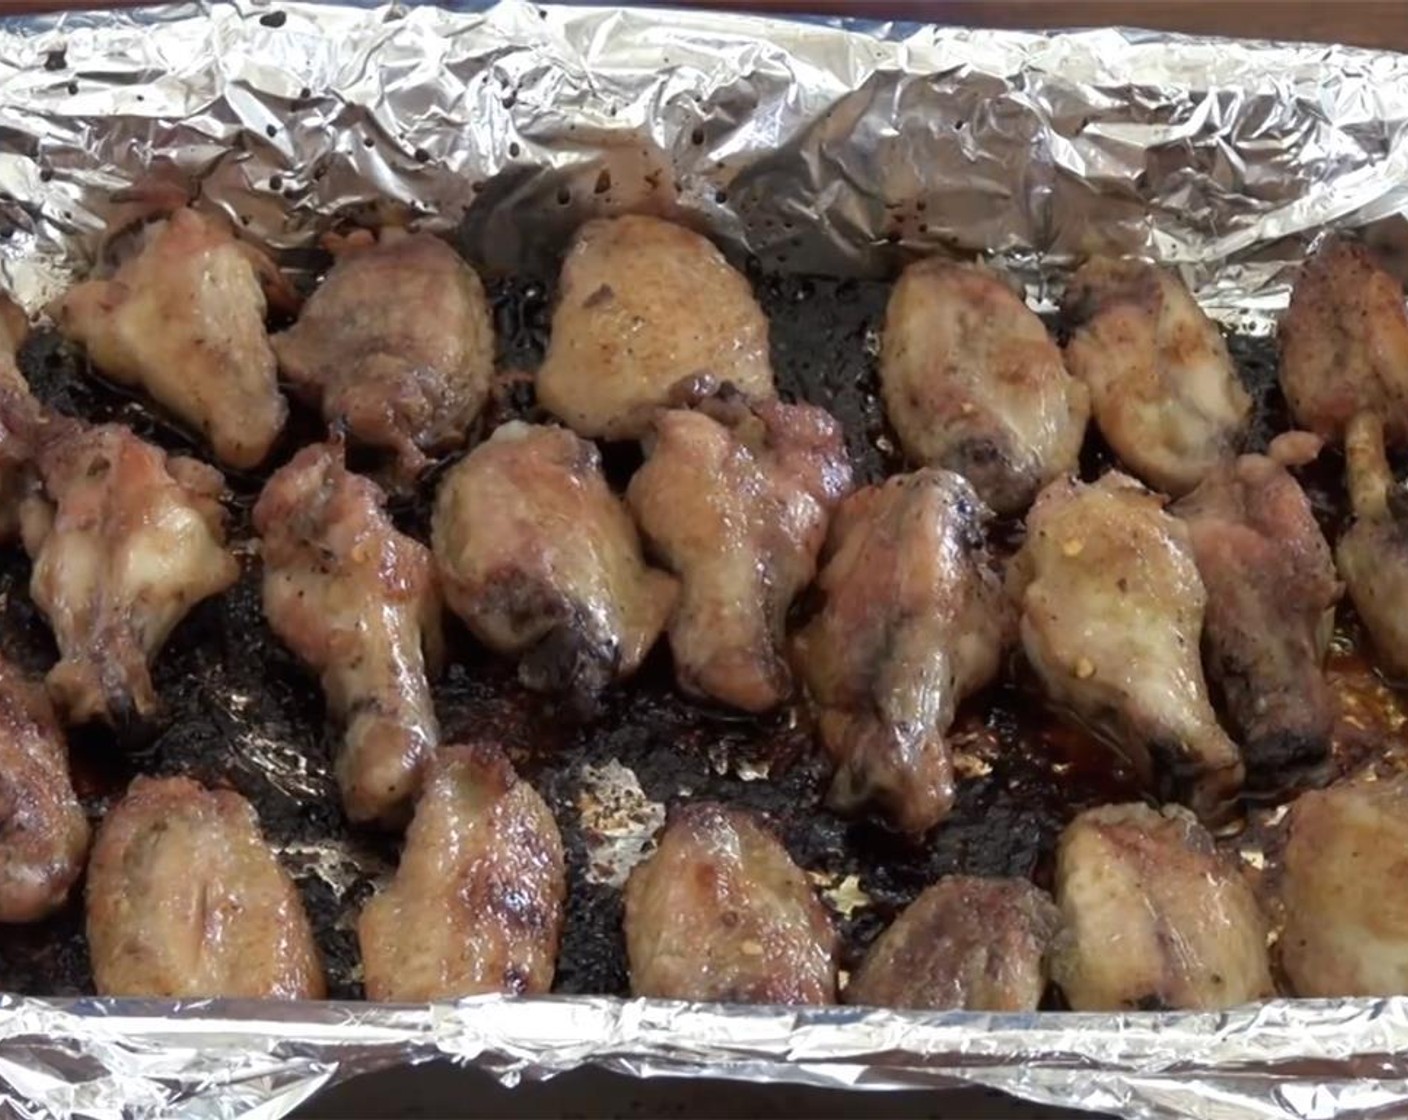 step 8 Remove them again and re-glaze only the top of the wings with the remaining honey. Return to the oven and bake for an extra 5 minutes.